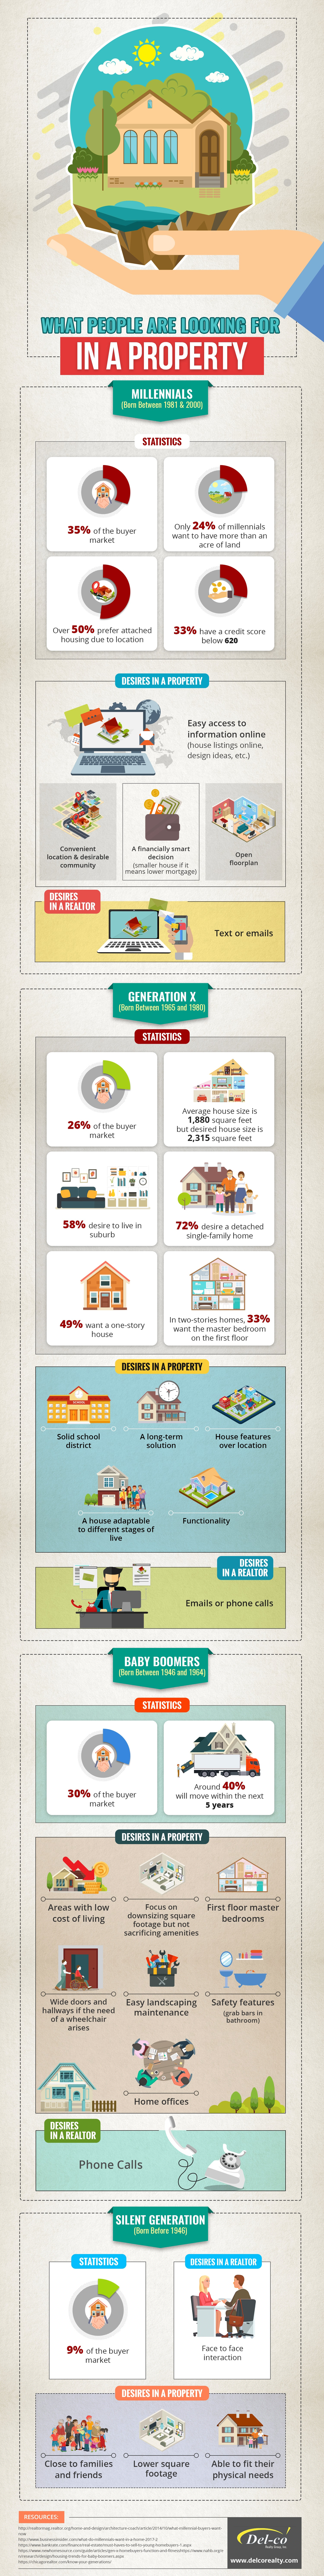 Home Buyers by Generation [Infographic]